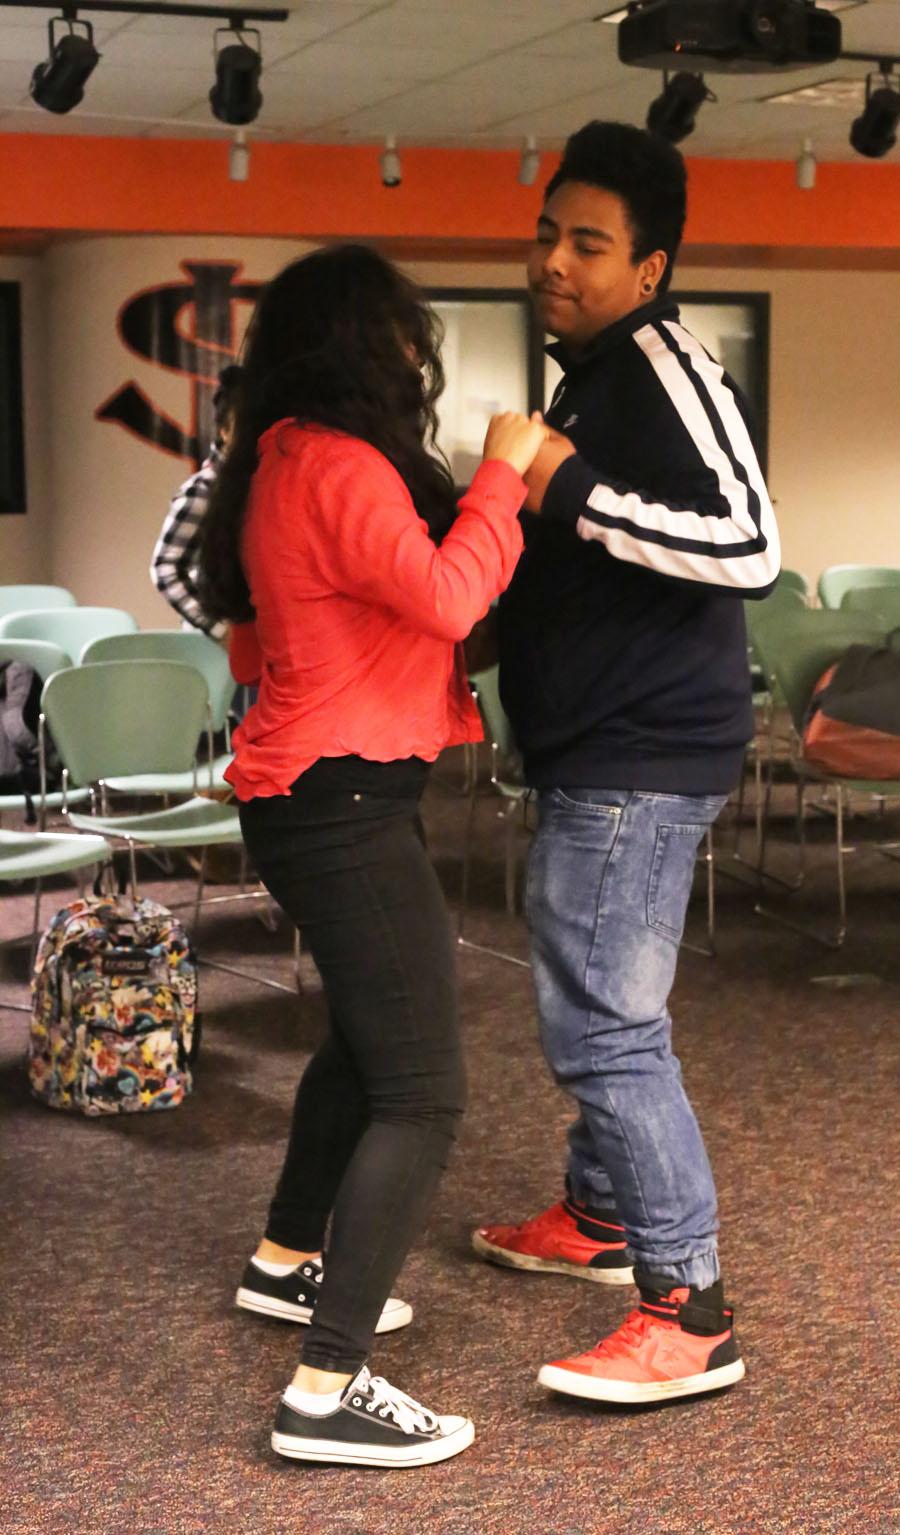 Students of the Latino Student Association dance to fun music to explore cultural differences.